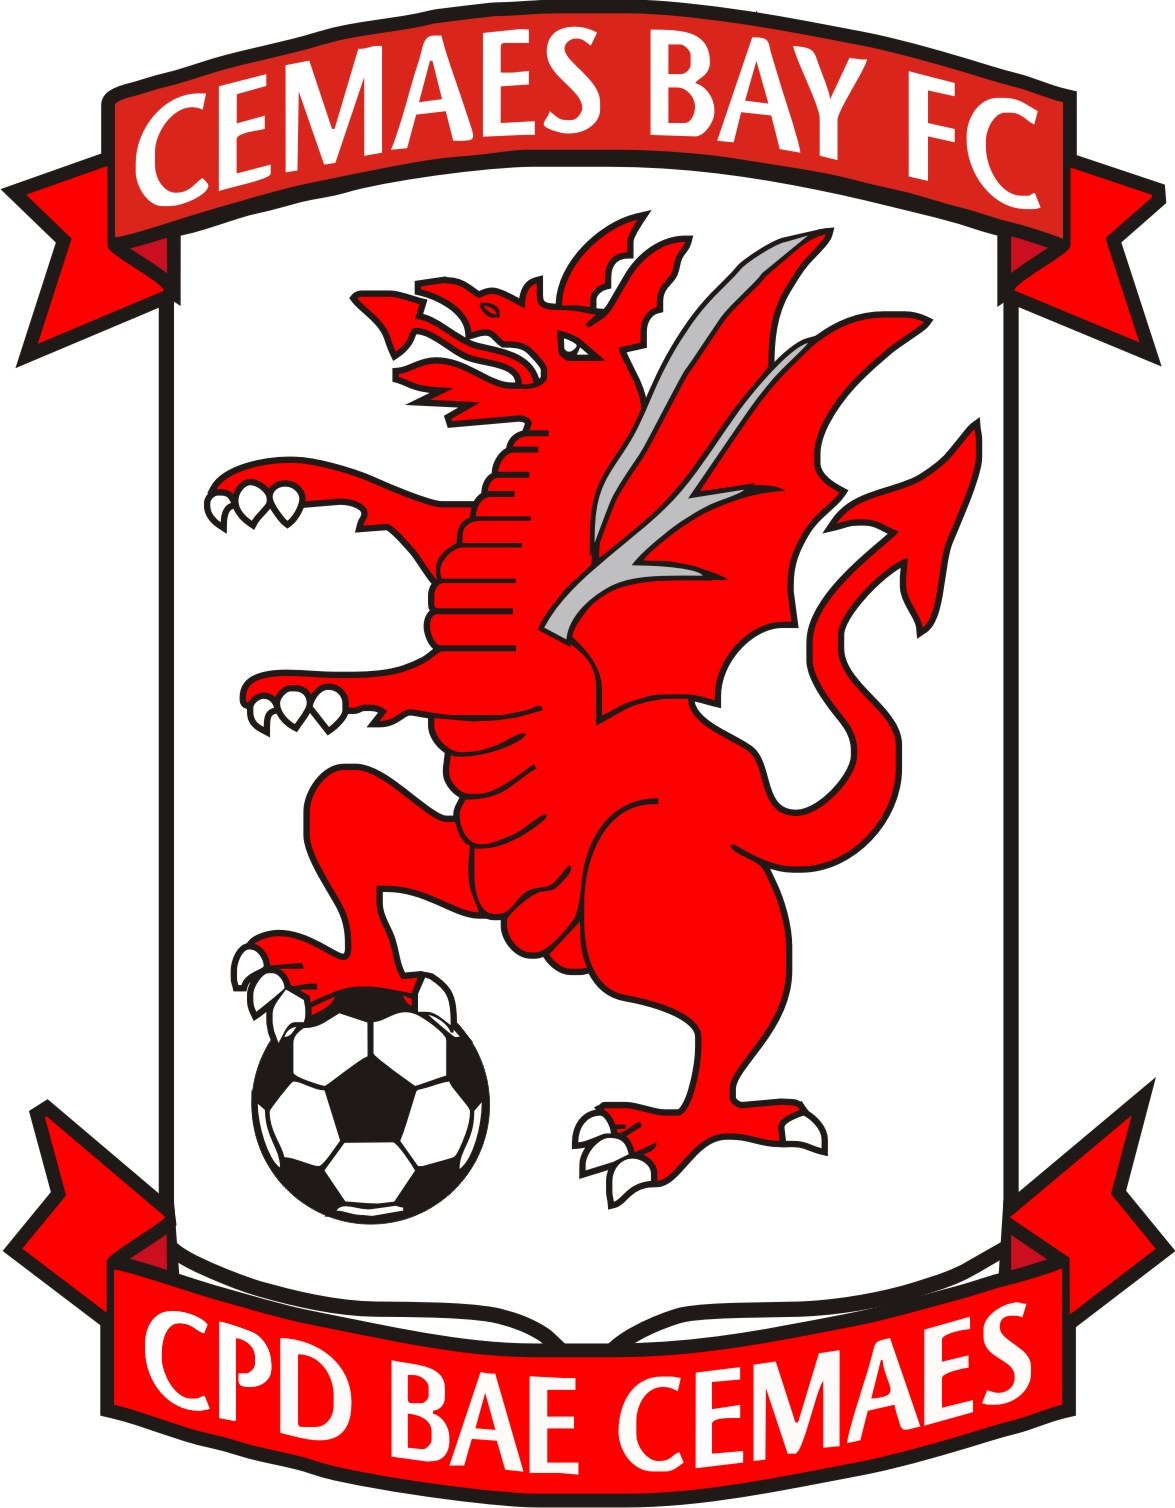 Cemaes Bay FC